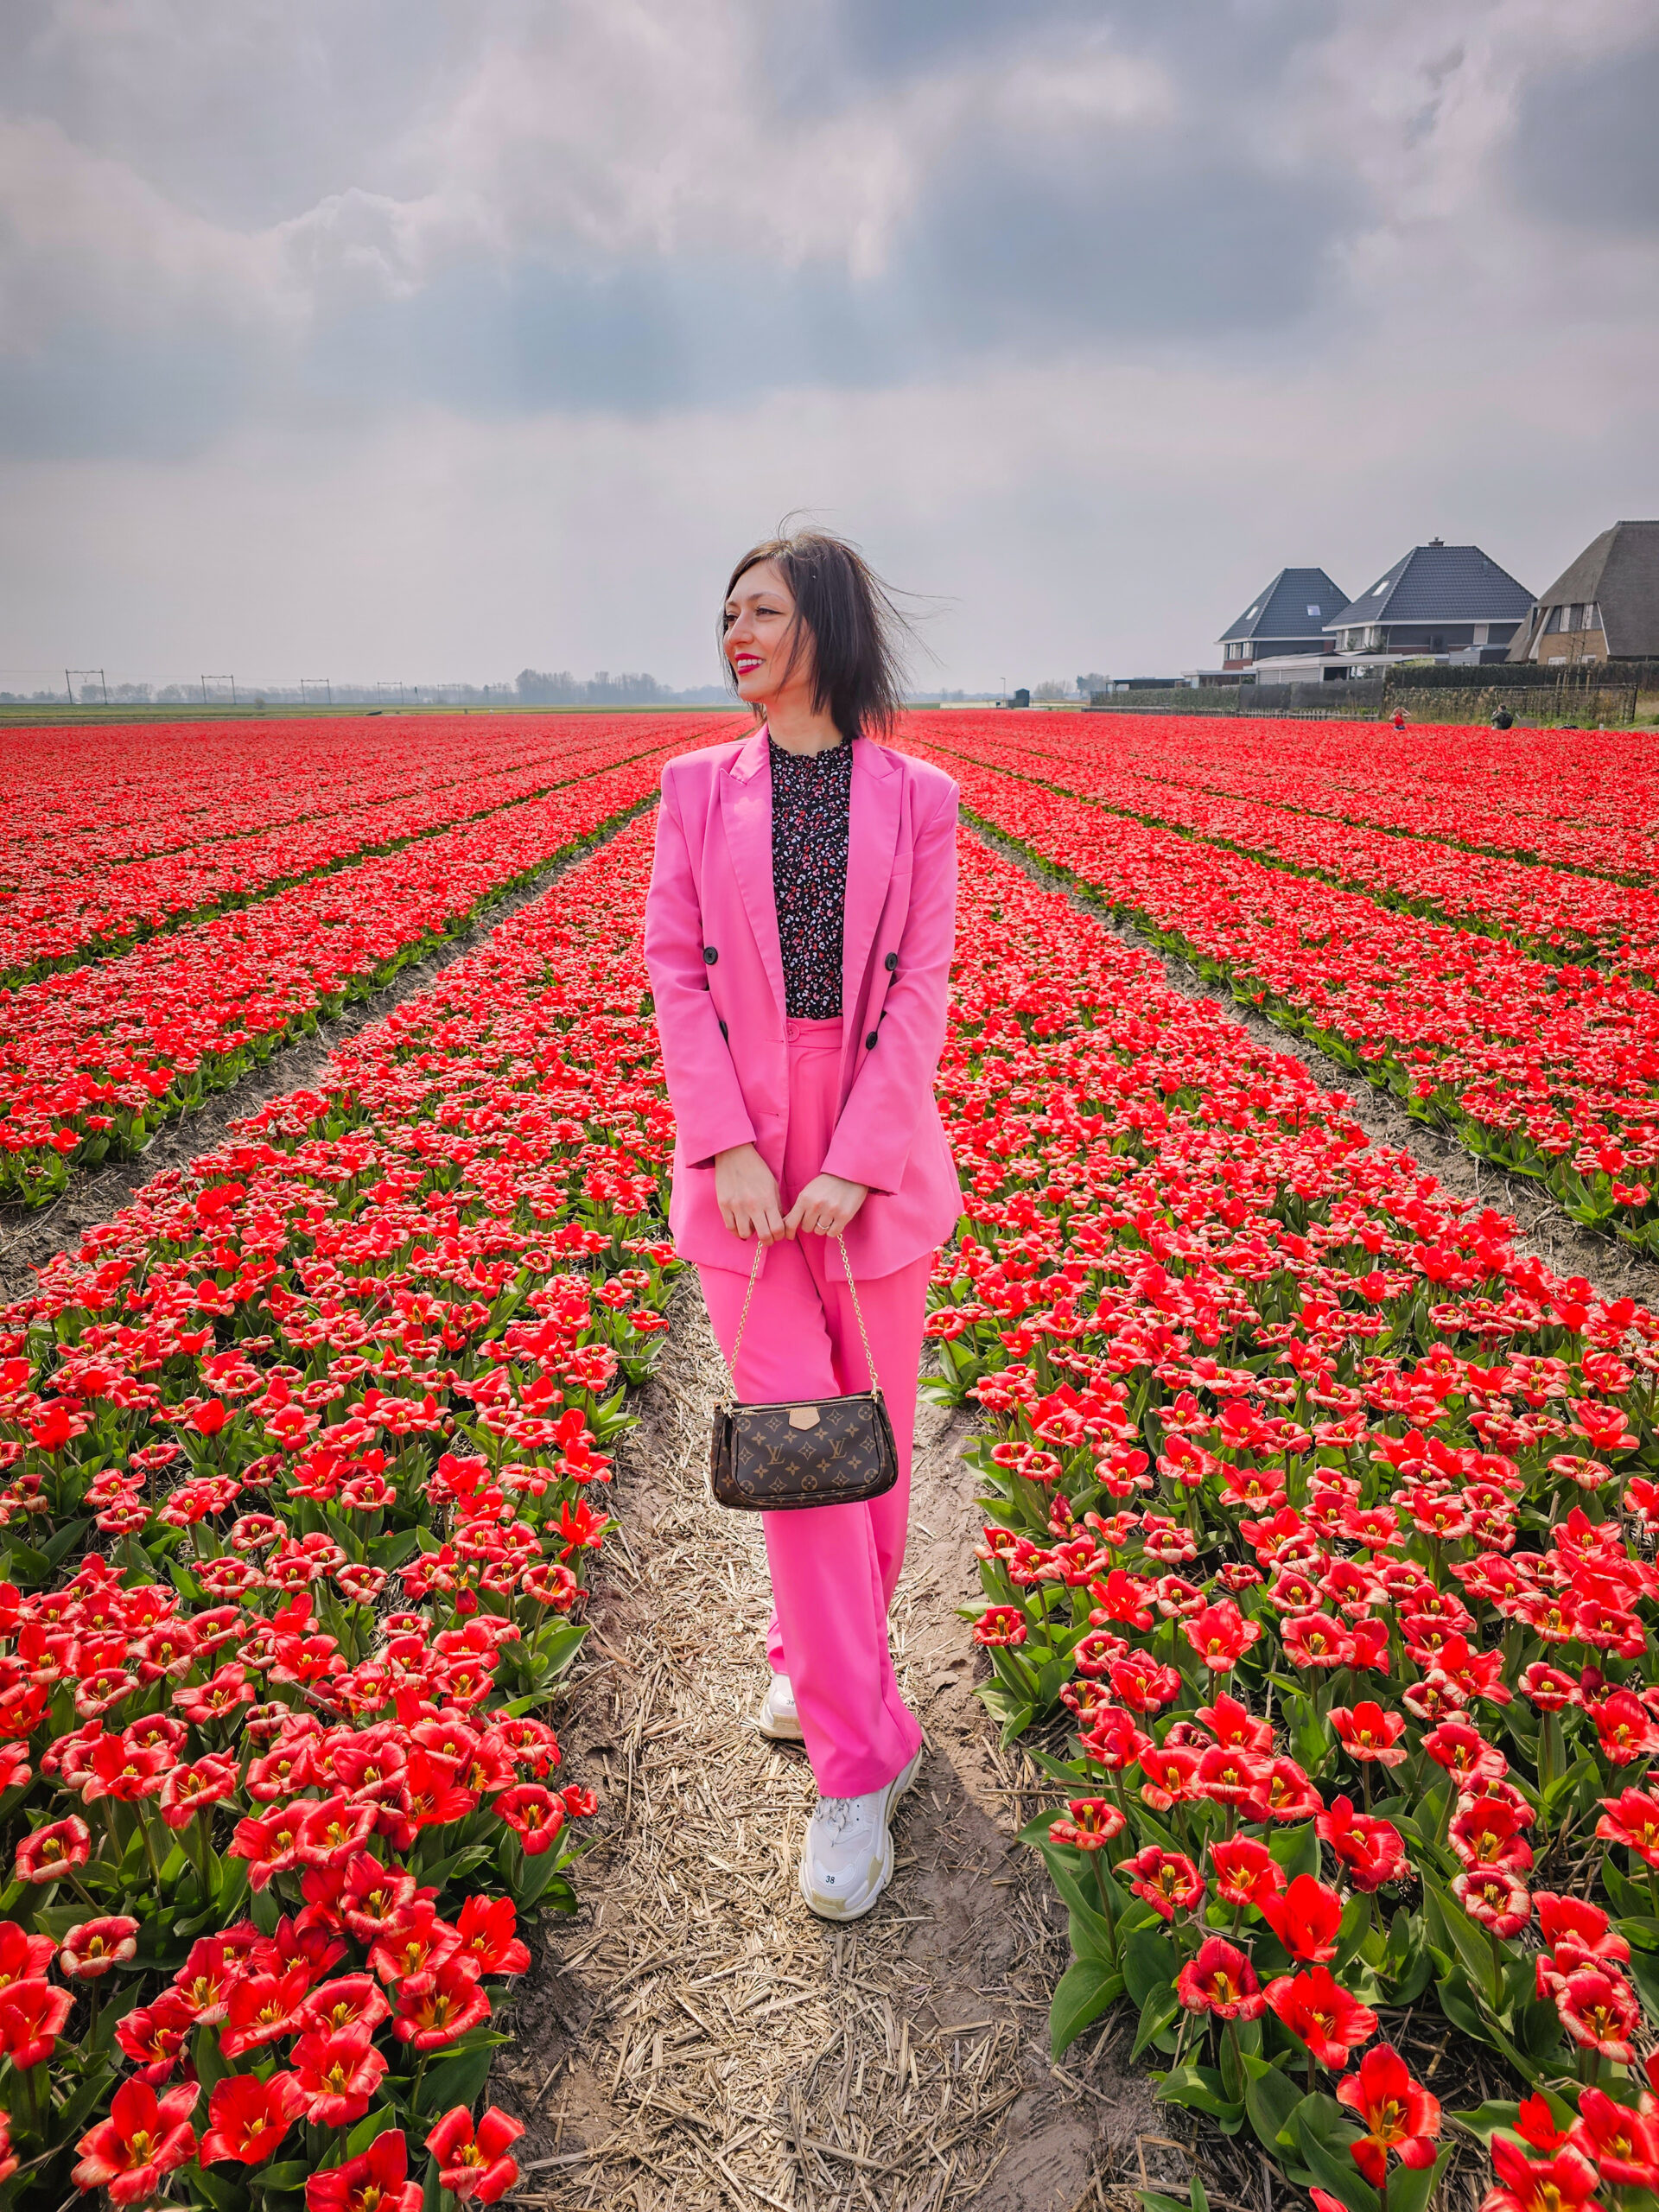 How to Visit Tulip Fields Near Amsterdam